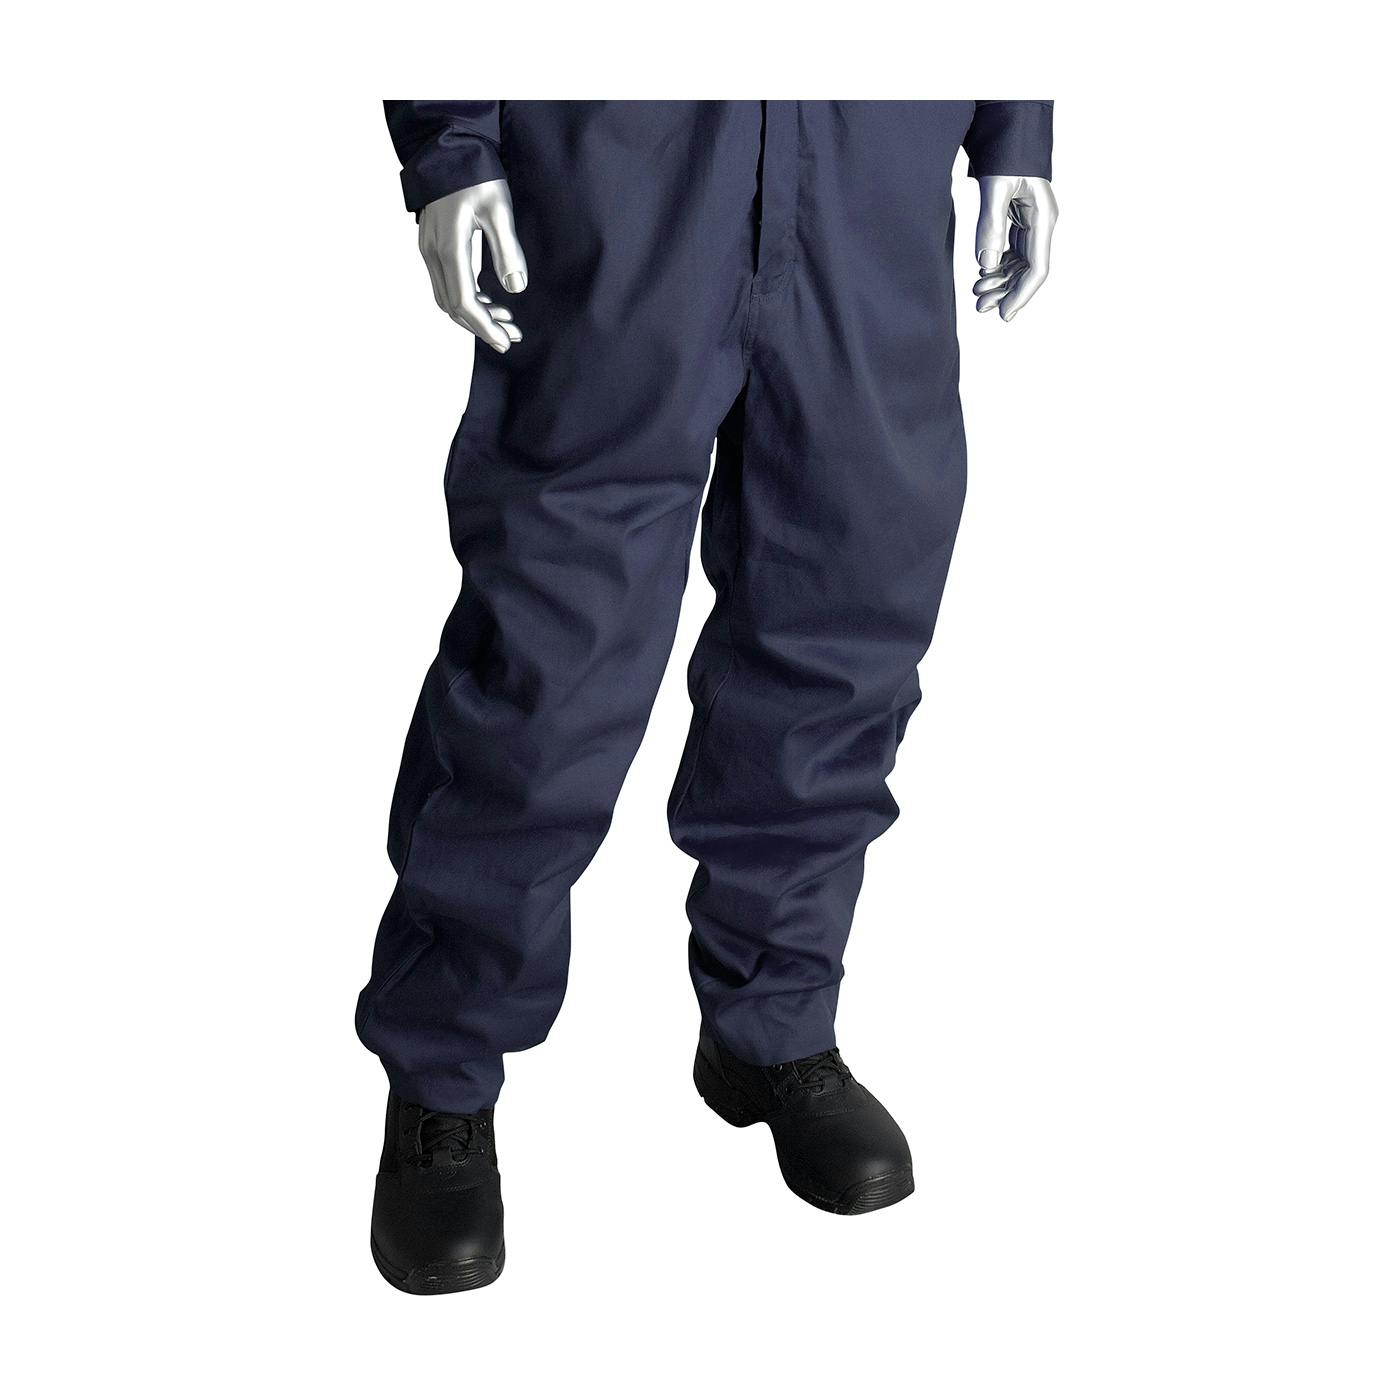 AR/FR Dual Certified Coverall with Zipper Closure - 9.2 Cal/cm2, Navy (385-FRSC) - 3XL